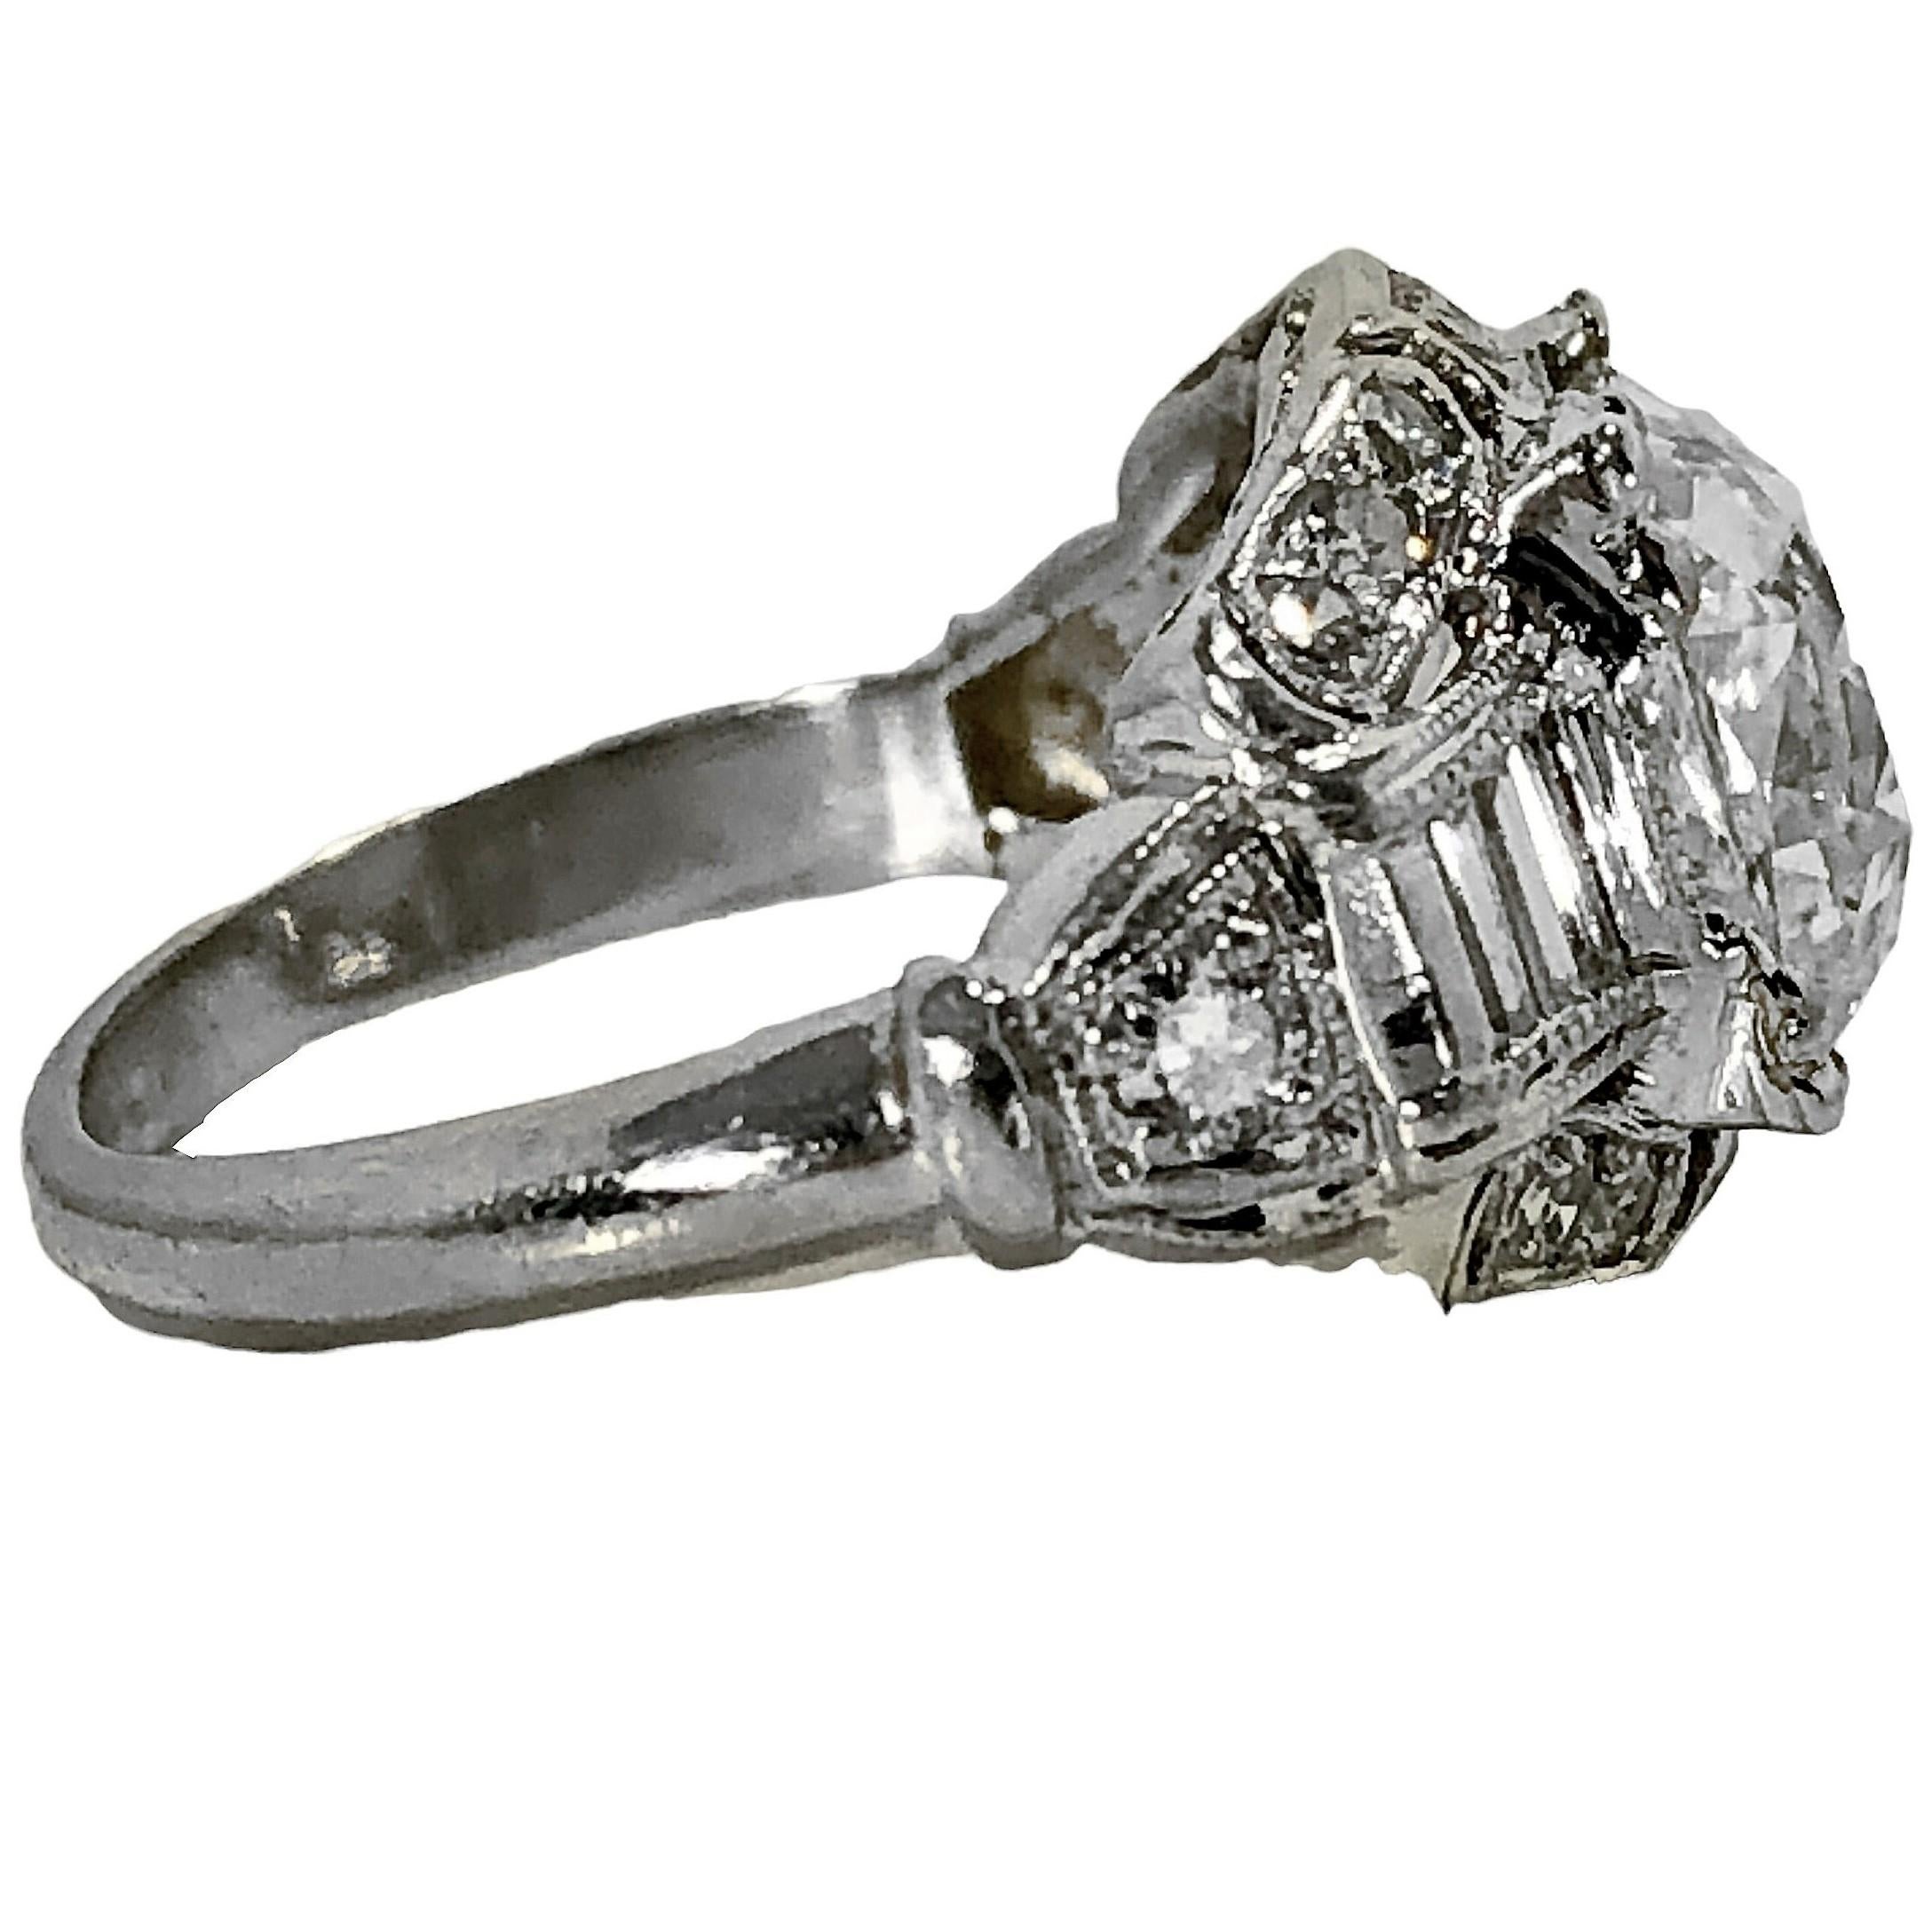 Opulent 2.98ct Old Cushion Cut Diamond in Platinum Art-Deco Solitaire Mounting 2